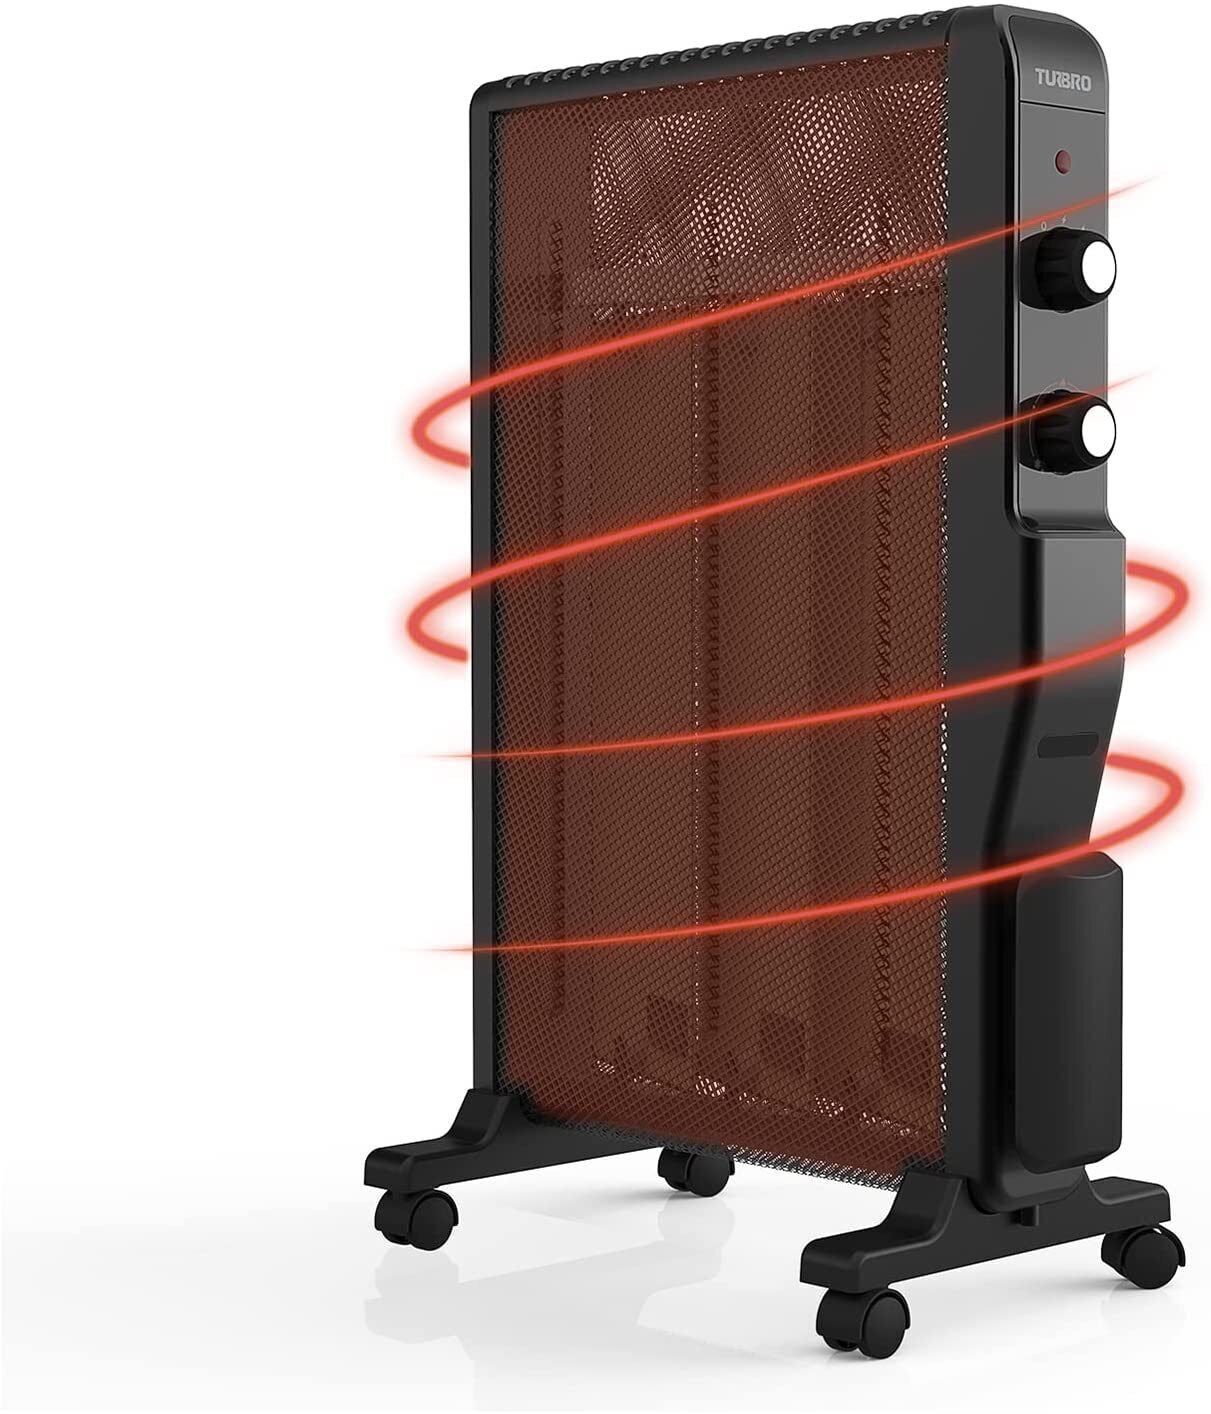 Small Panel Space Heater